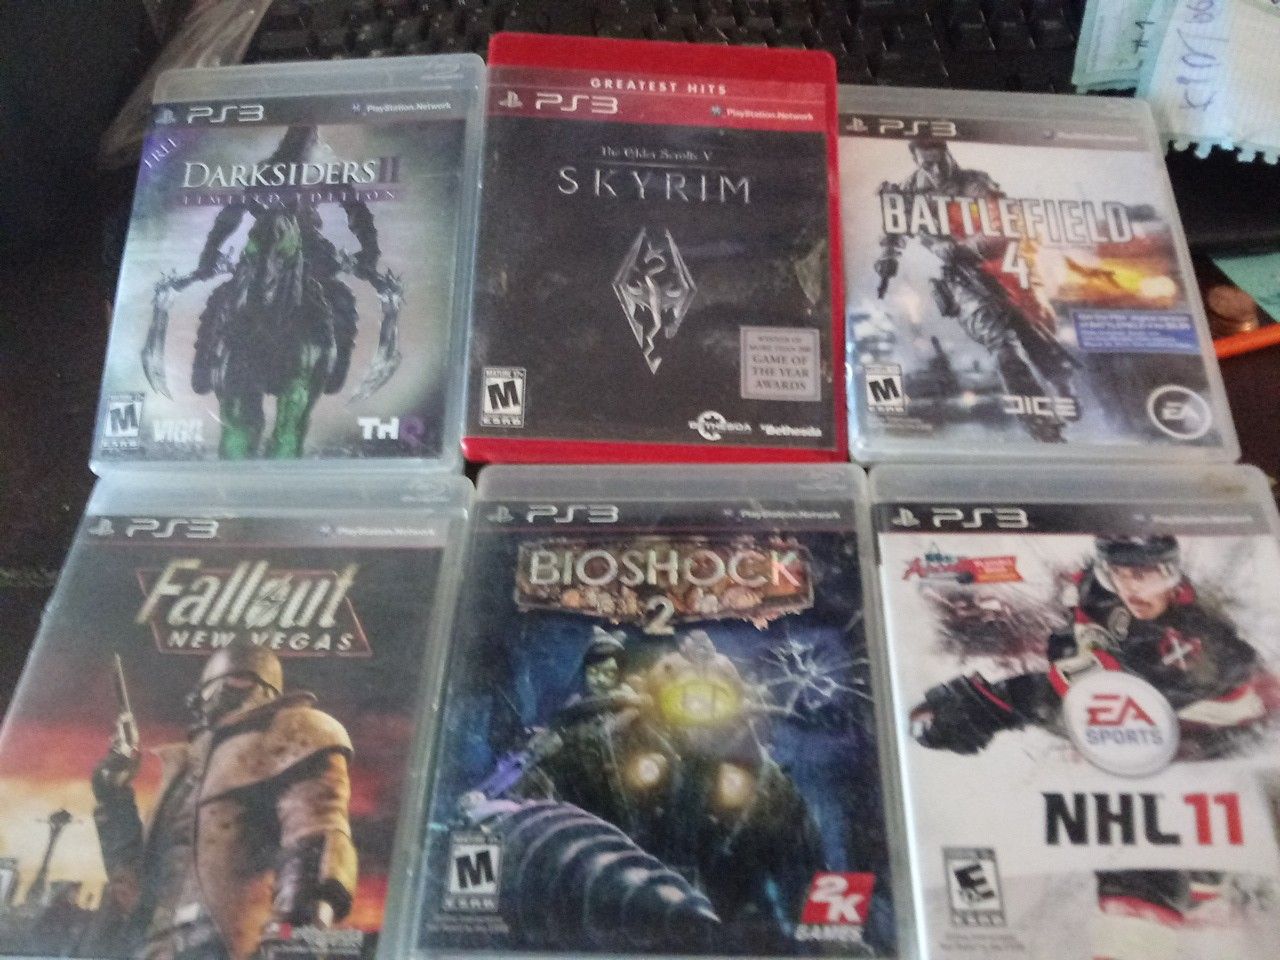 PS3 6 game can get separate or all for less